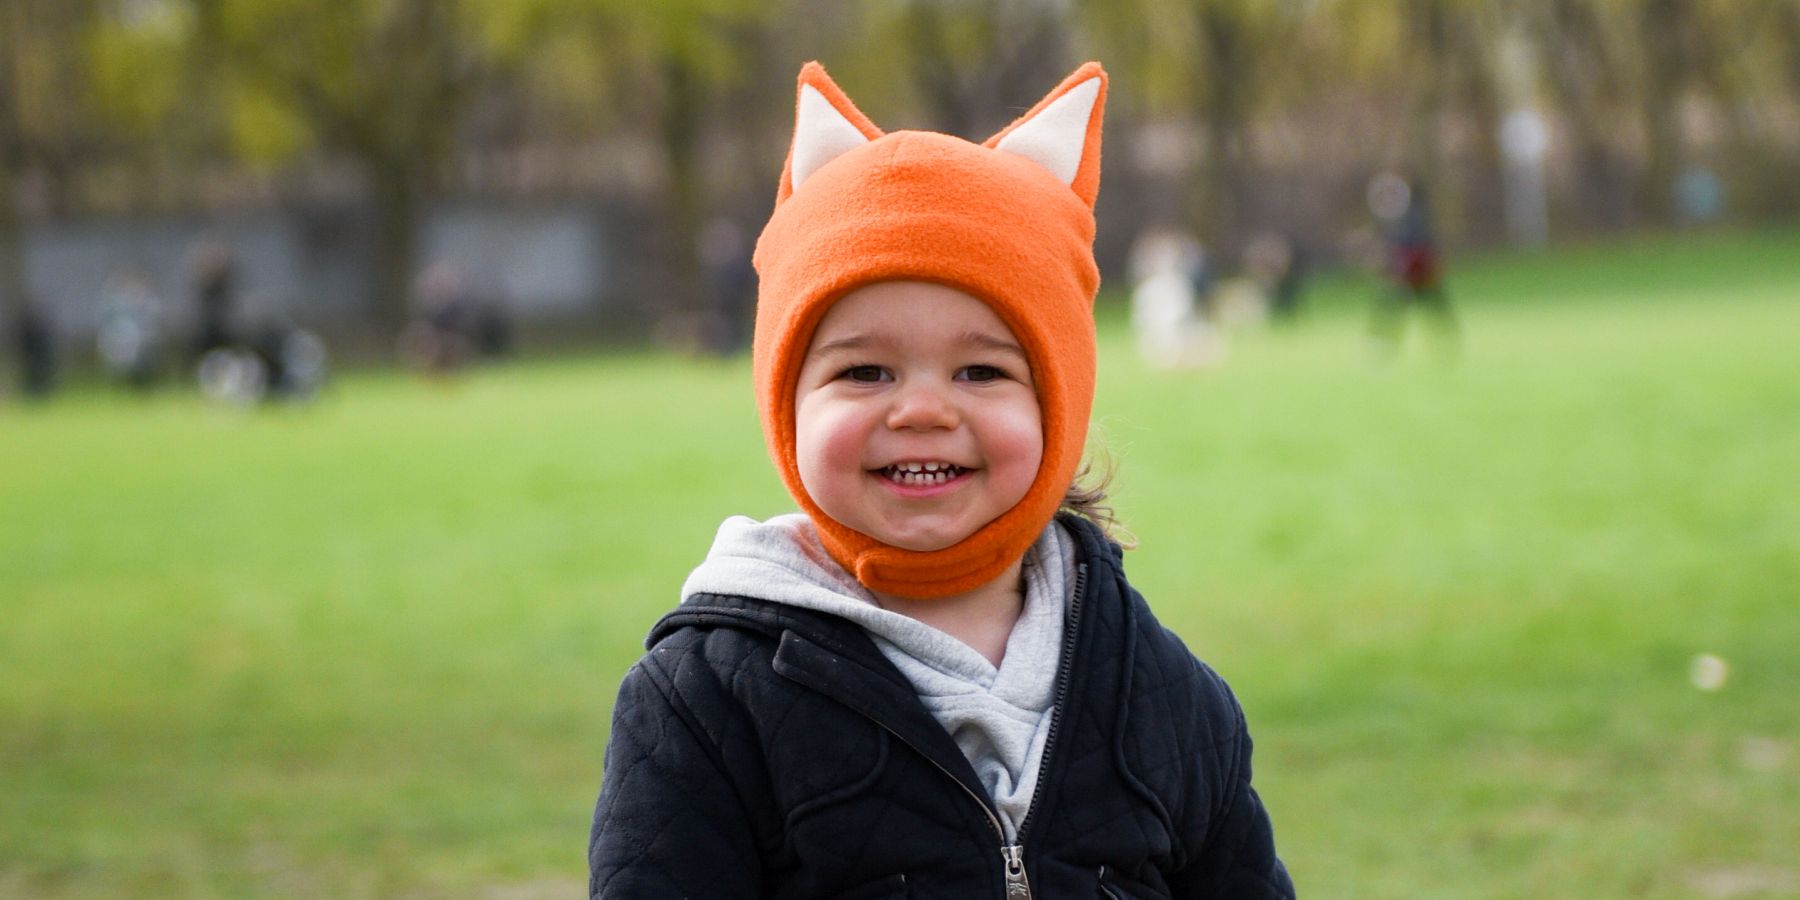 Kids' Fall and Winter Hats- Polartec Fleece hats and neck warmers, canvas bonnets with flannel linings, corduroy bonnets, and organic beanies. Made in Canada by Puffin Gear